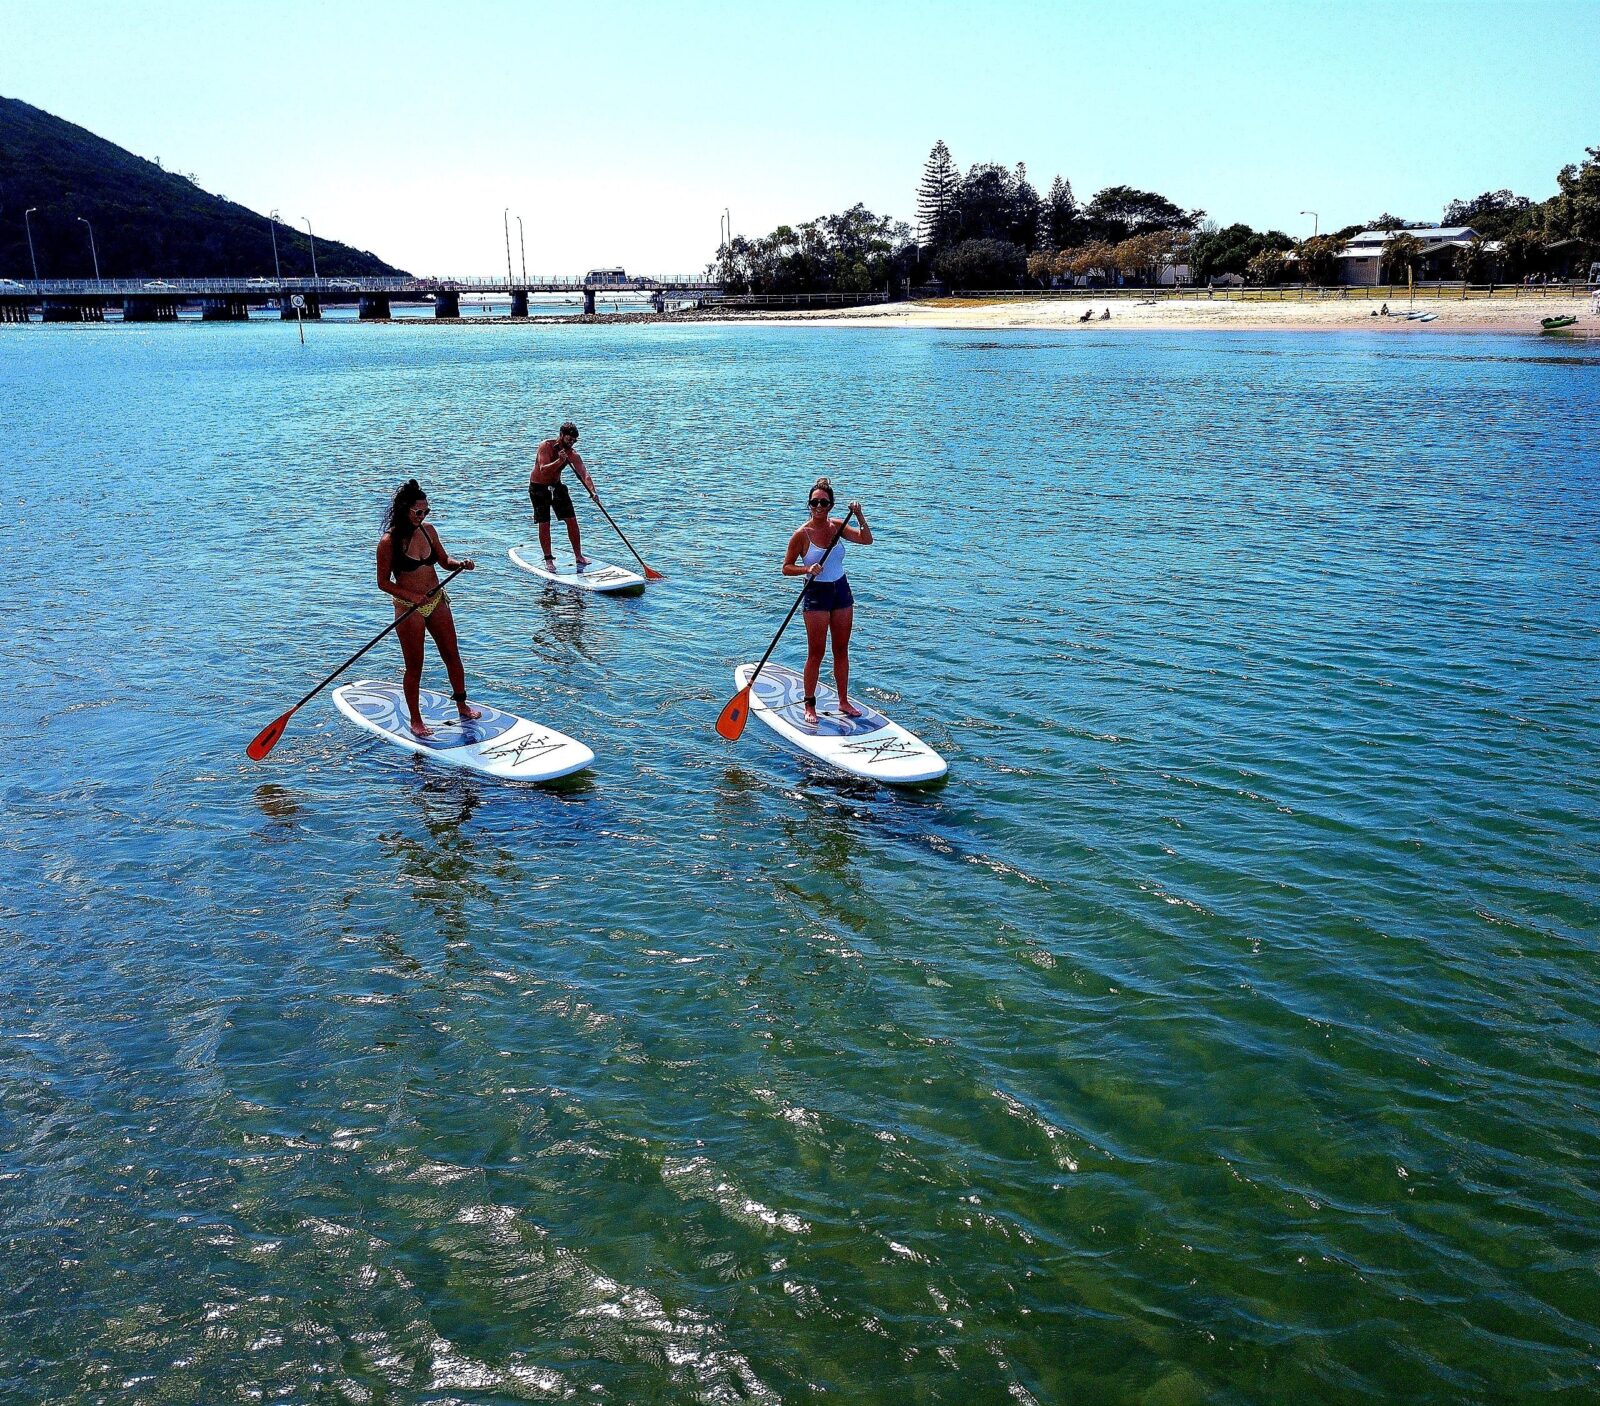 Stand up Paddle Boarding with All Coast PAddle Board Hire at Tallebudgera Creek. High Quality Paddle